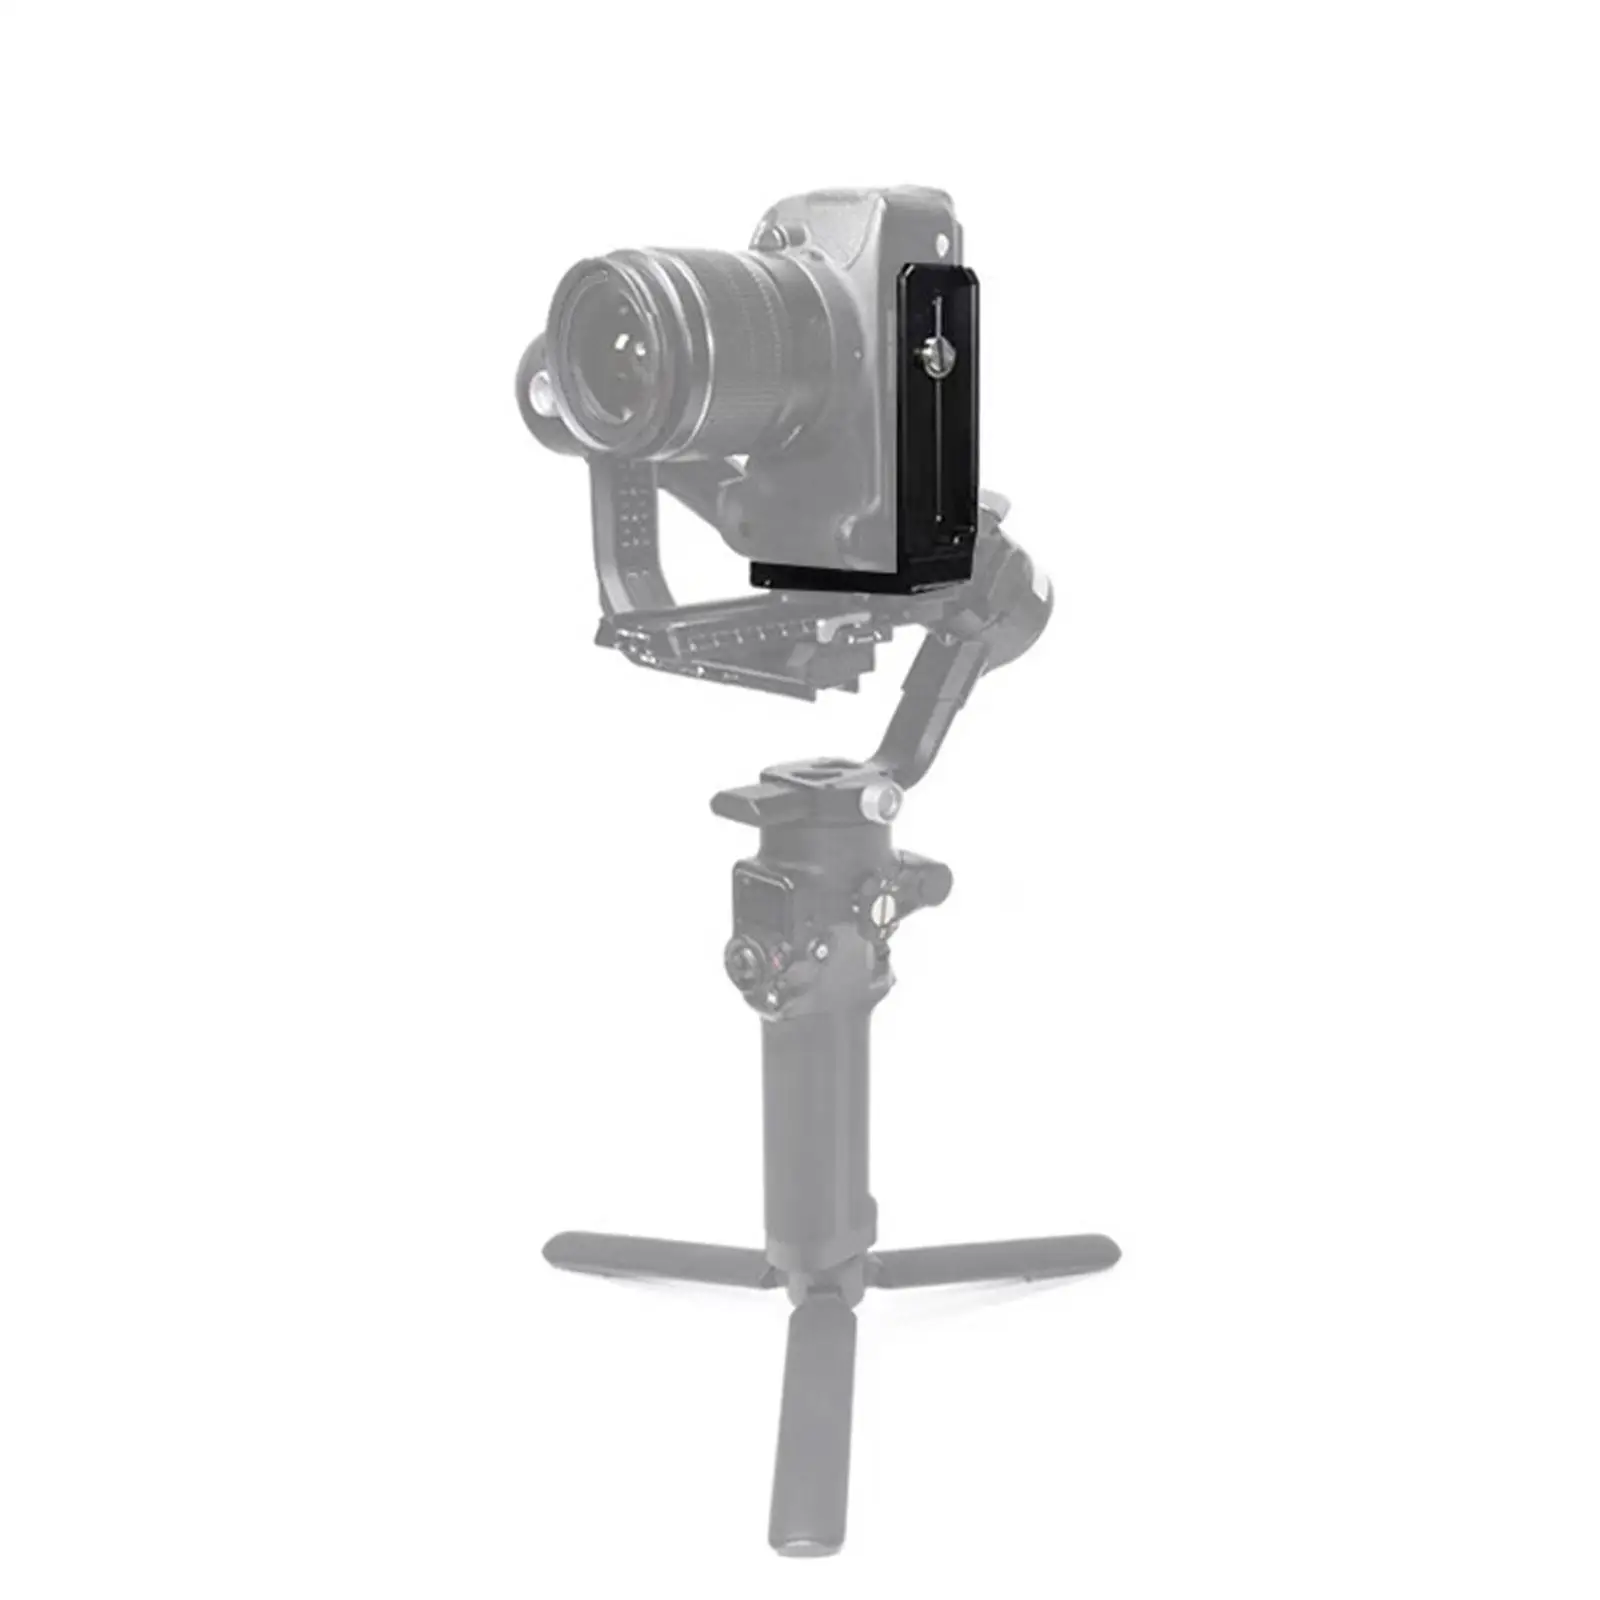 Professional Camera L Bracket Vertical Horizontal Portable with 1/4`` Threaded Holes for Rsc2 Photography Gimbal Stabilizer